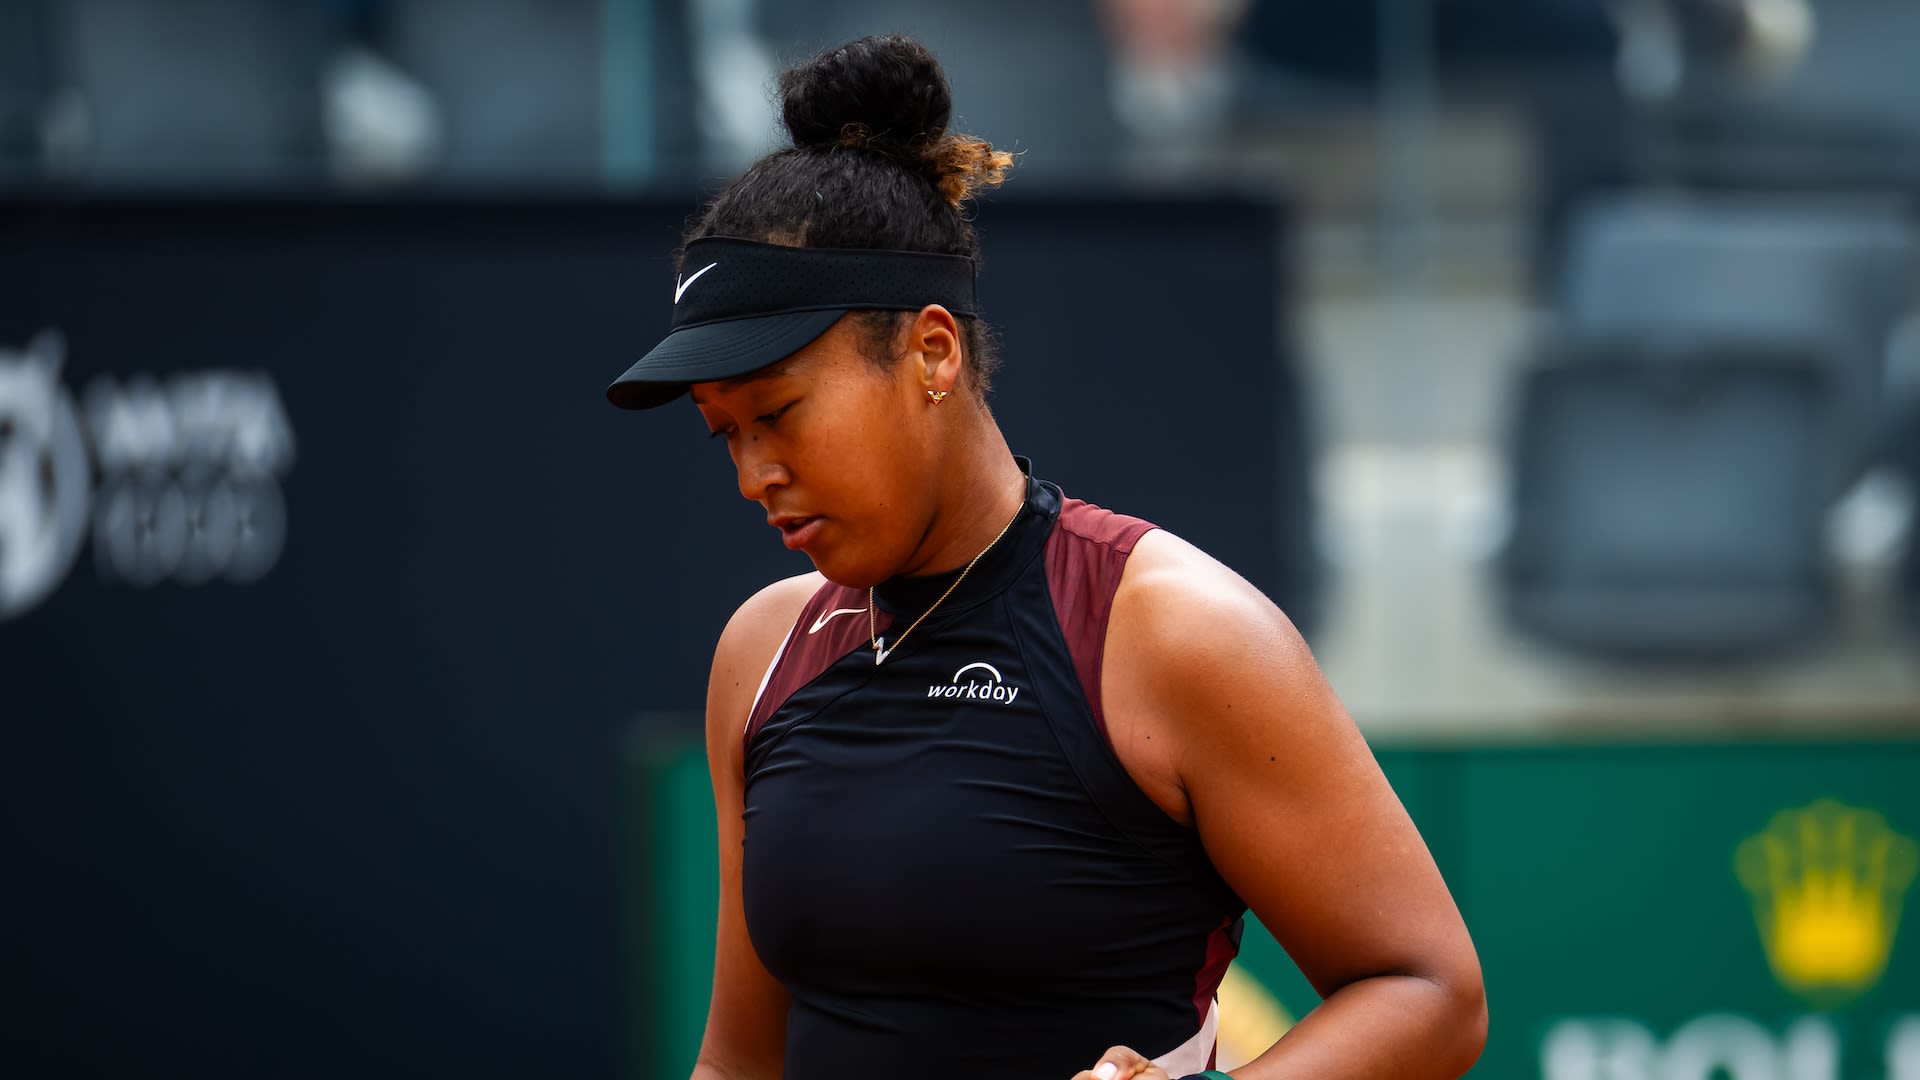 Naomi Osaka Rome run ends in fourth round, former No. 1 bows out to Zheng Qinwen | Tennis.com